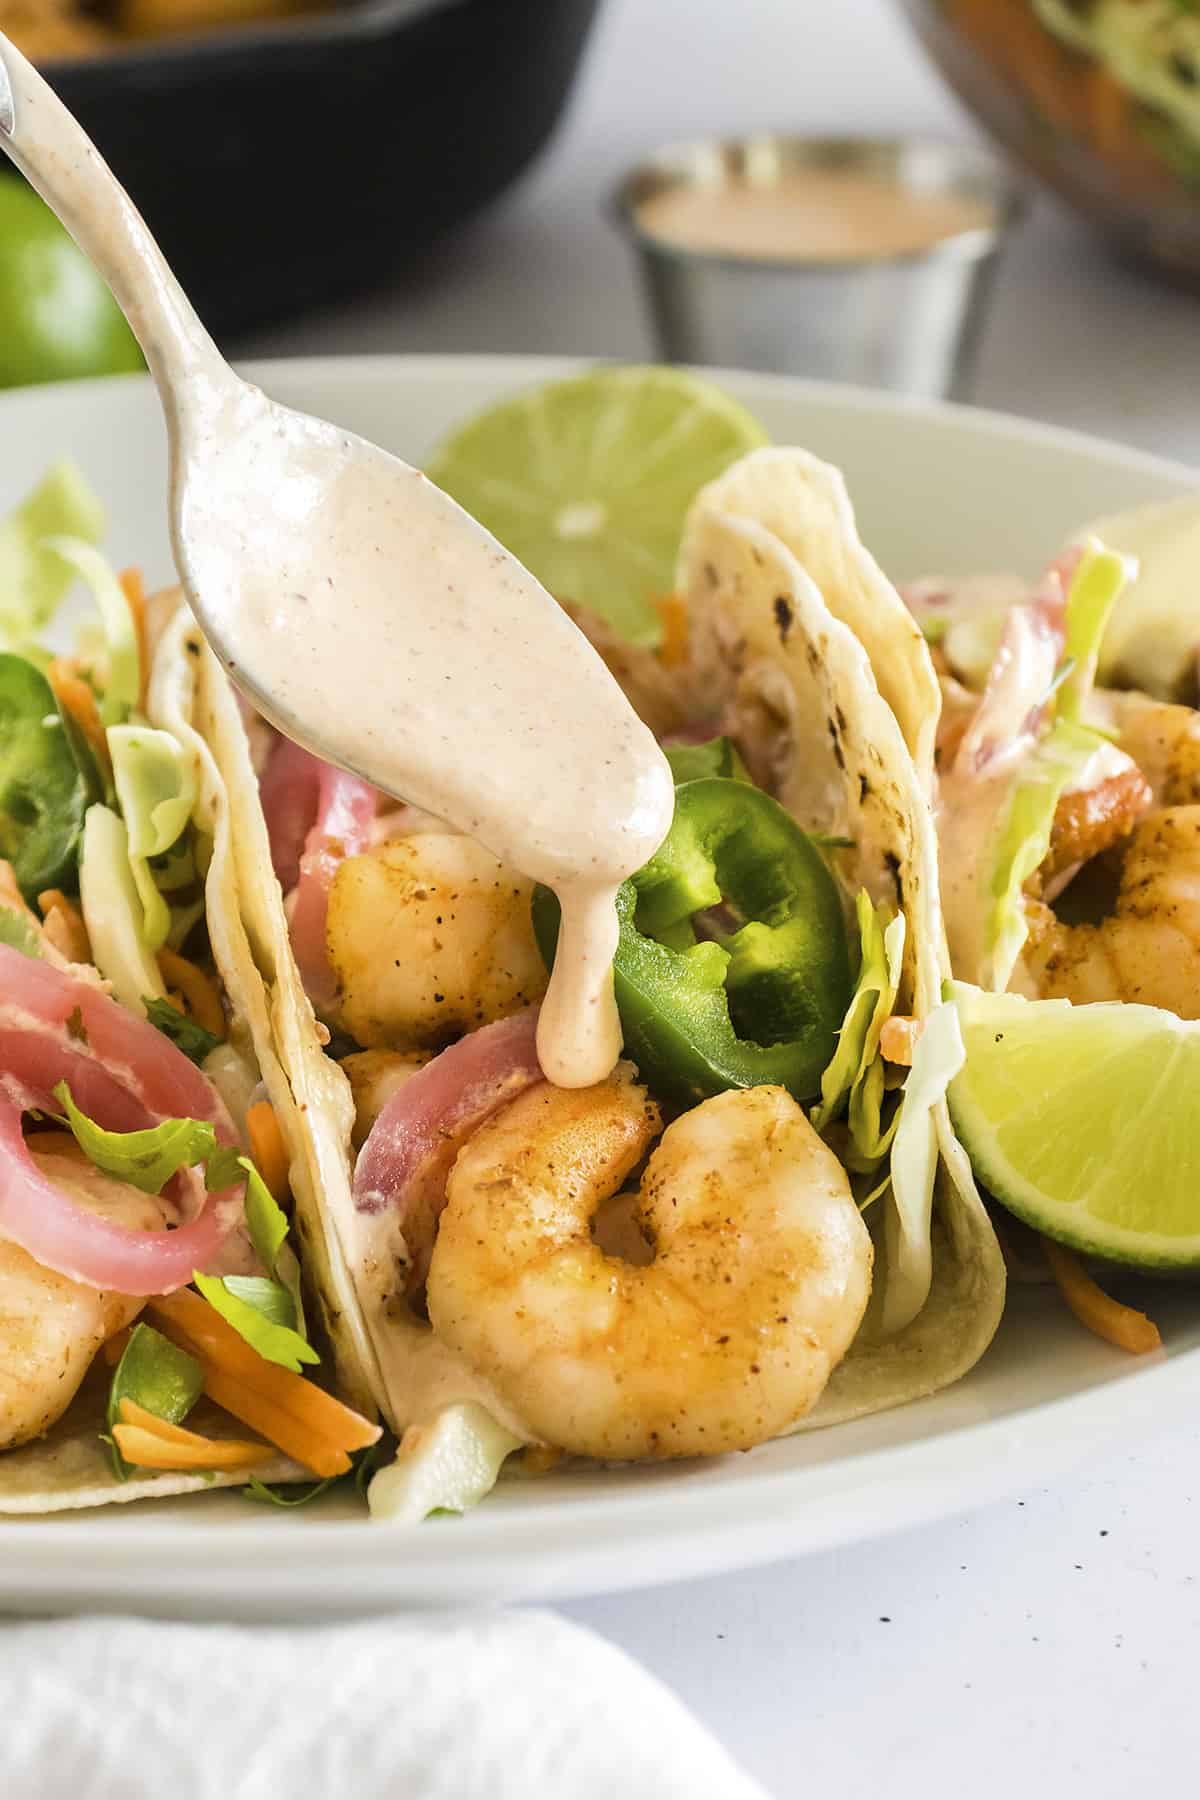 Chipotle sauce being drizzled over shrimp tacos.